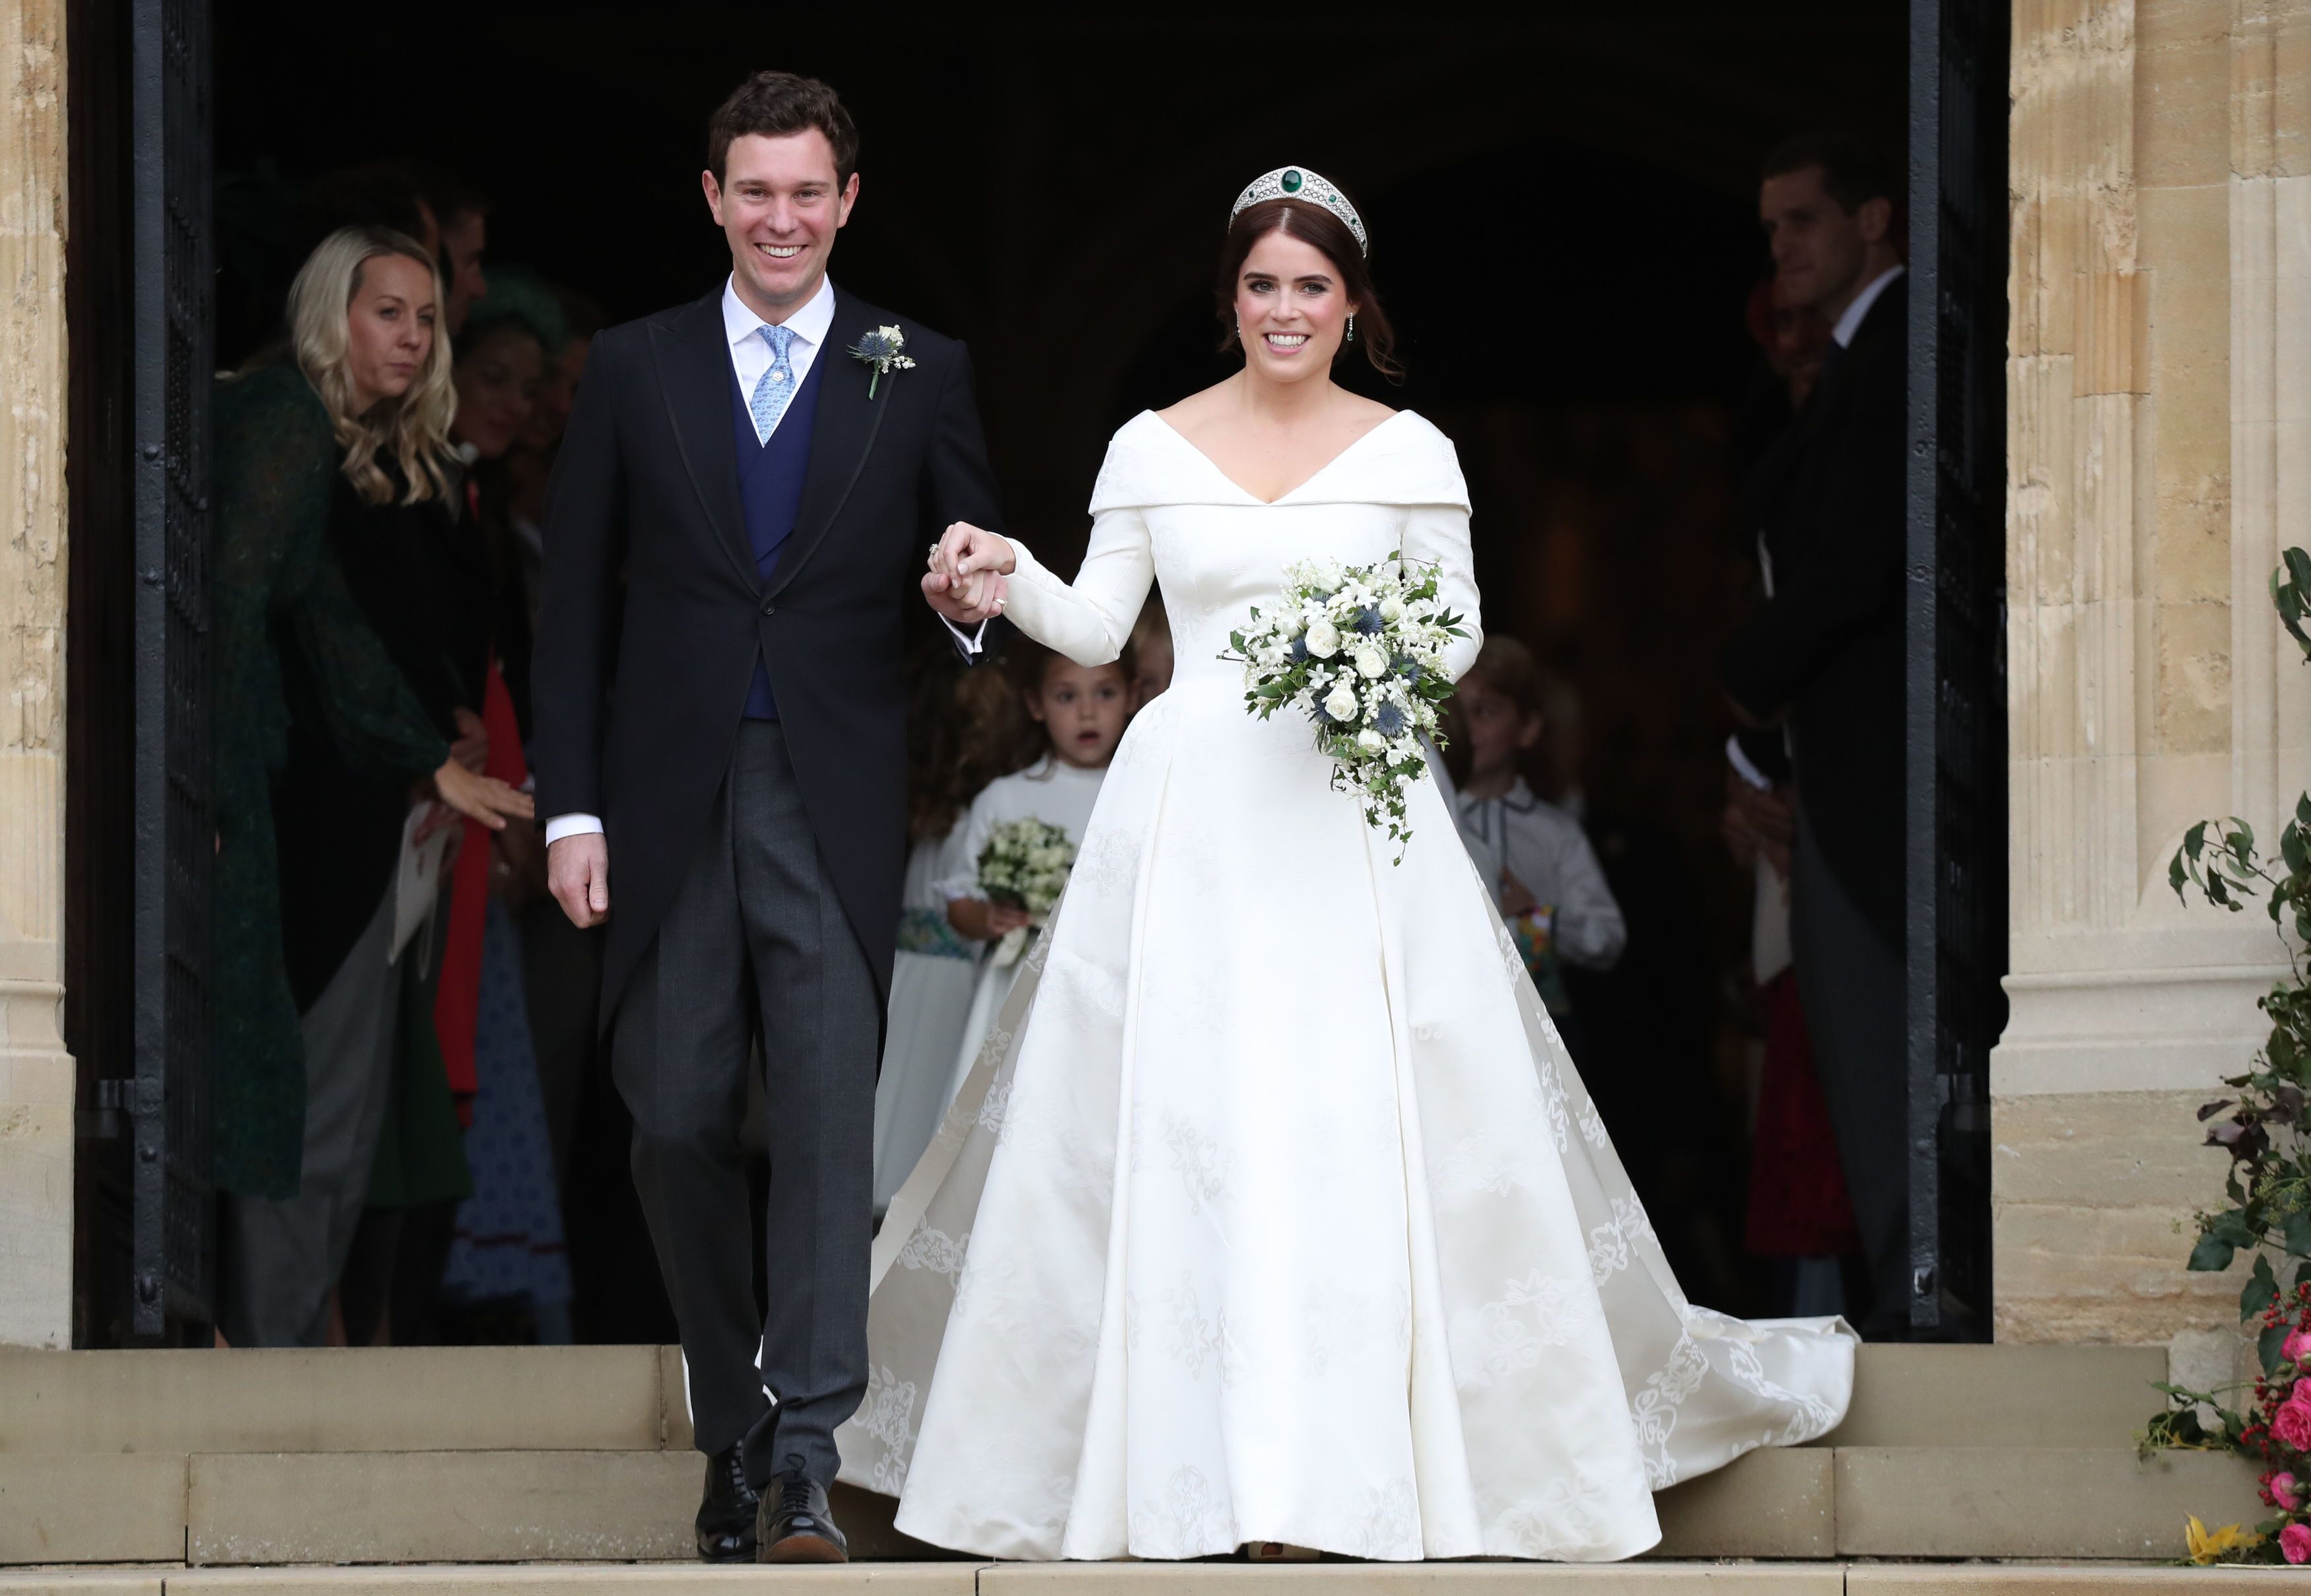 Princess Eugenie of York and her husband Jack Brooksbank on the steps of St George's Chapel after their wedding at St. George's Chapel on October 12, 2018 in Windsor, England | Photo: Getty Images